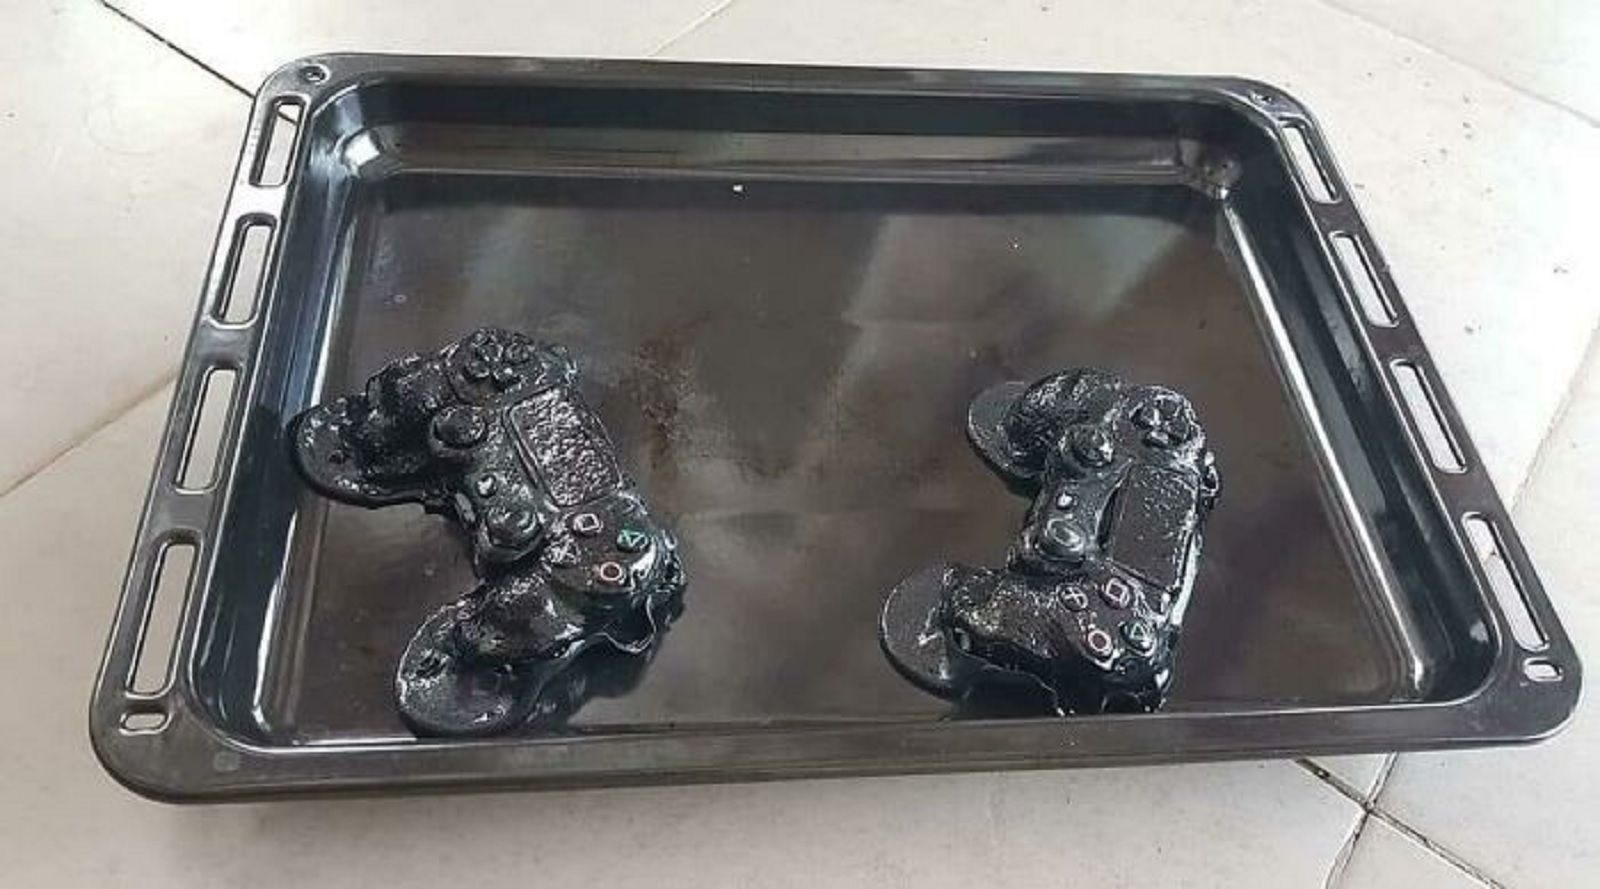 melted controllers